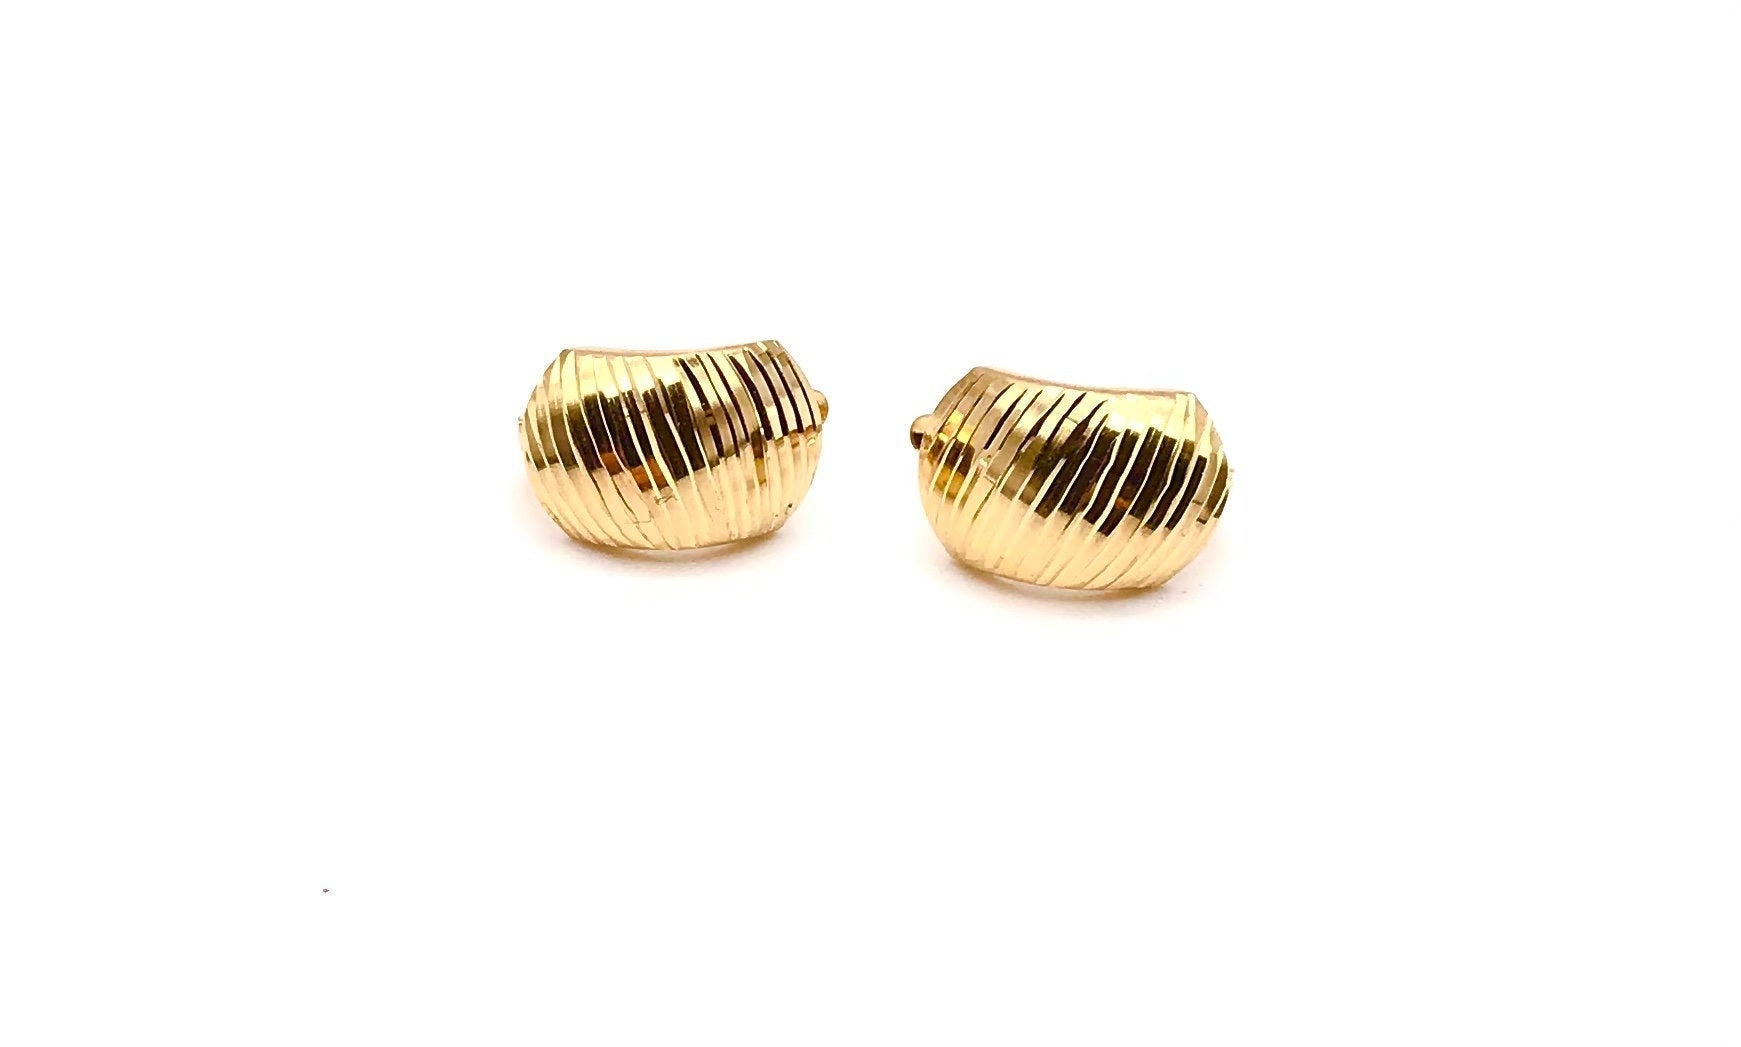 Elegant Yellow Earrings in 18K Gold Handmade By Italian Artisans Perfect Gift For Your Loved One Women's Studs